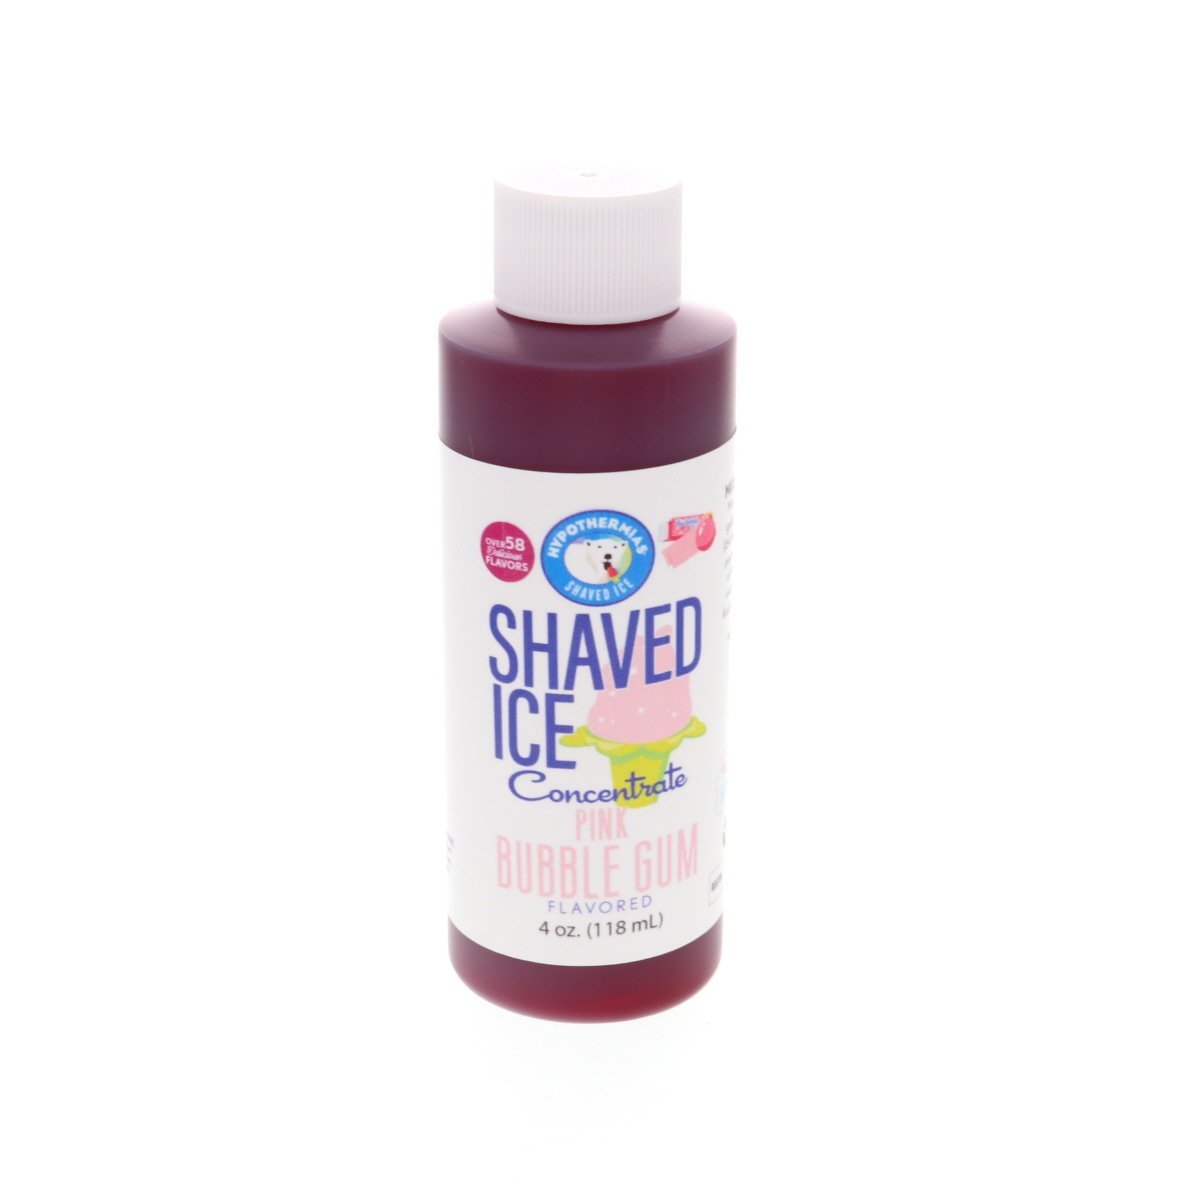 Hypothermias pink bubble shaved ice or snow cone flavor syrup concentrate 4 Fl Oz.